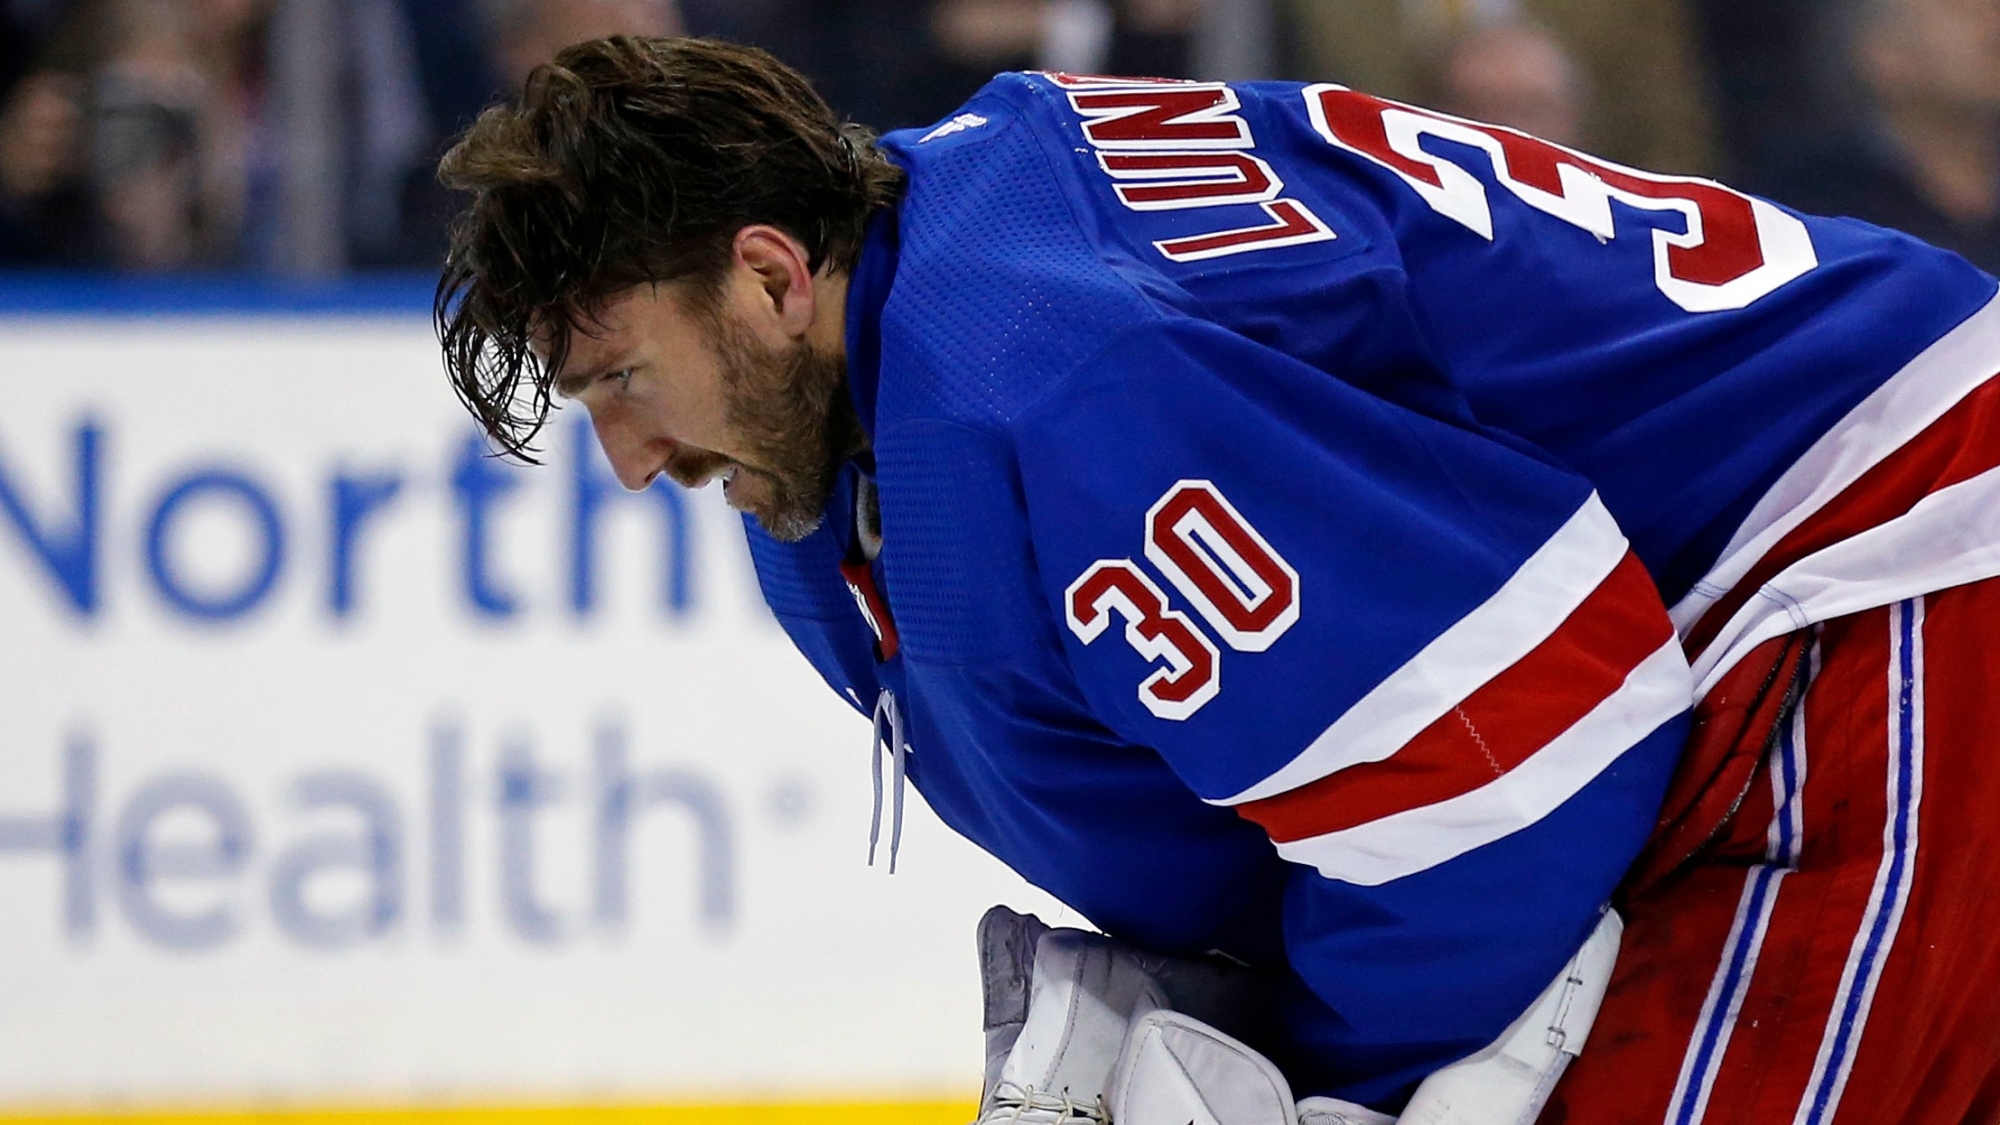 Capitals goalie Lundqvist to miss season with heart condition